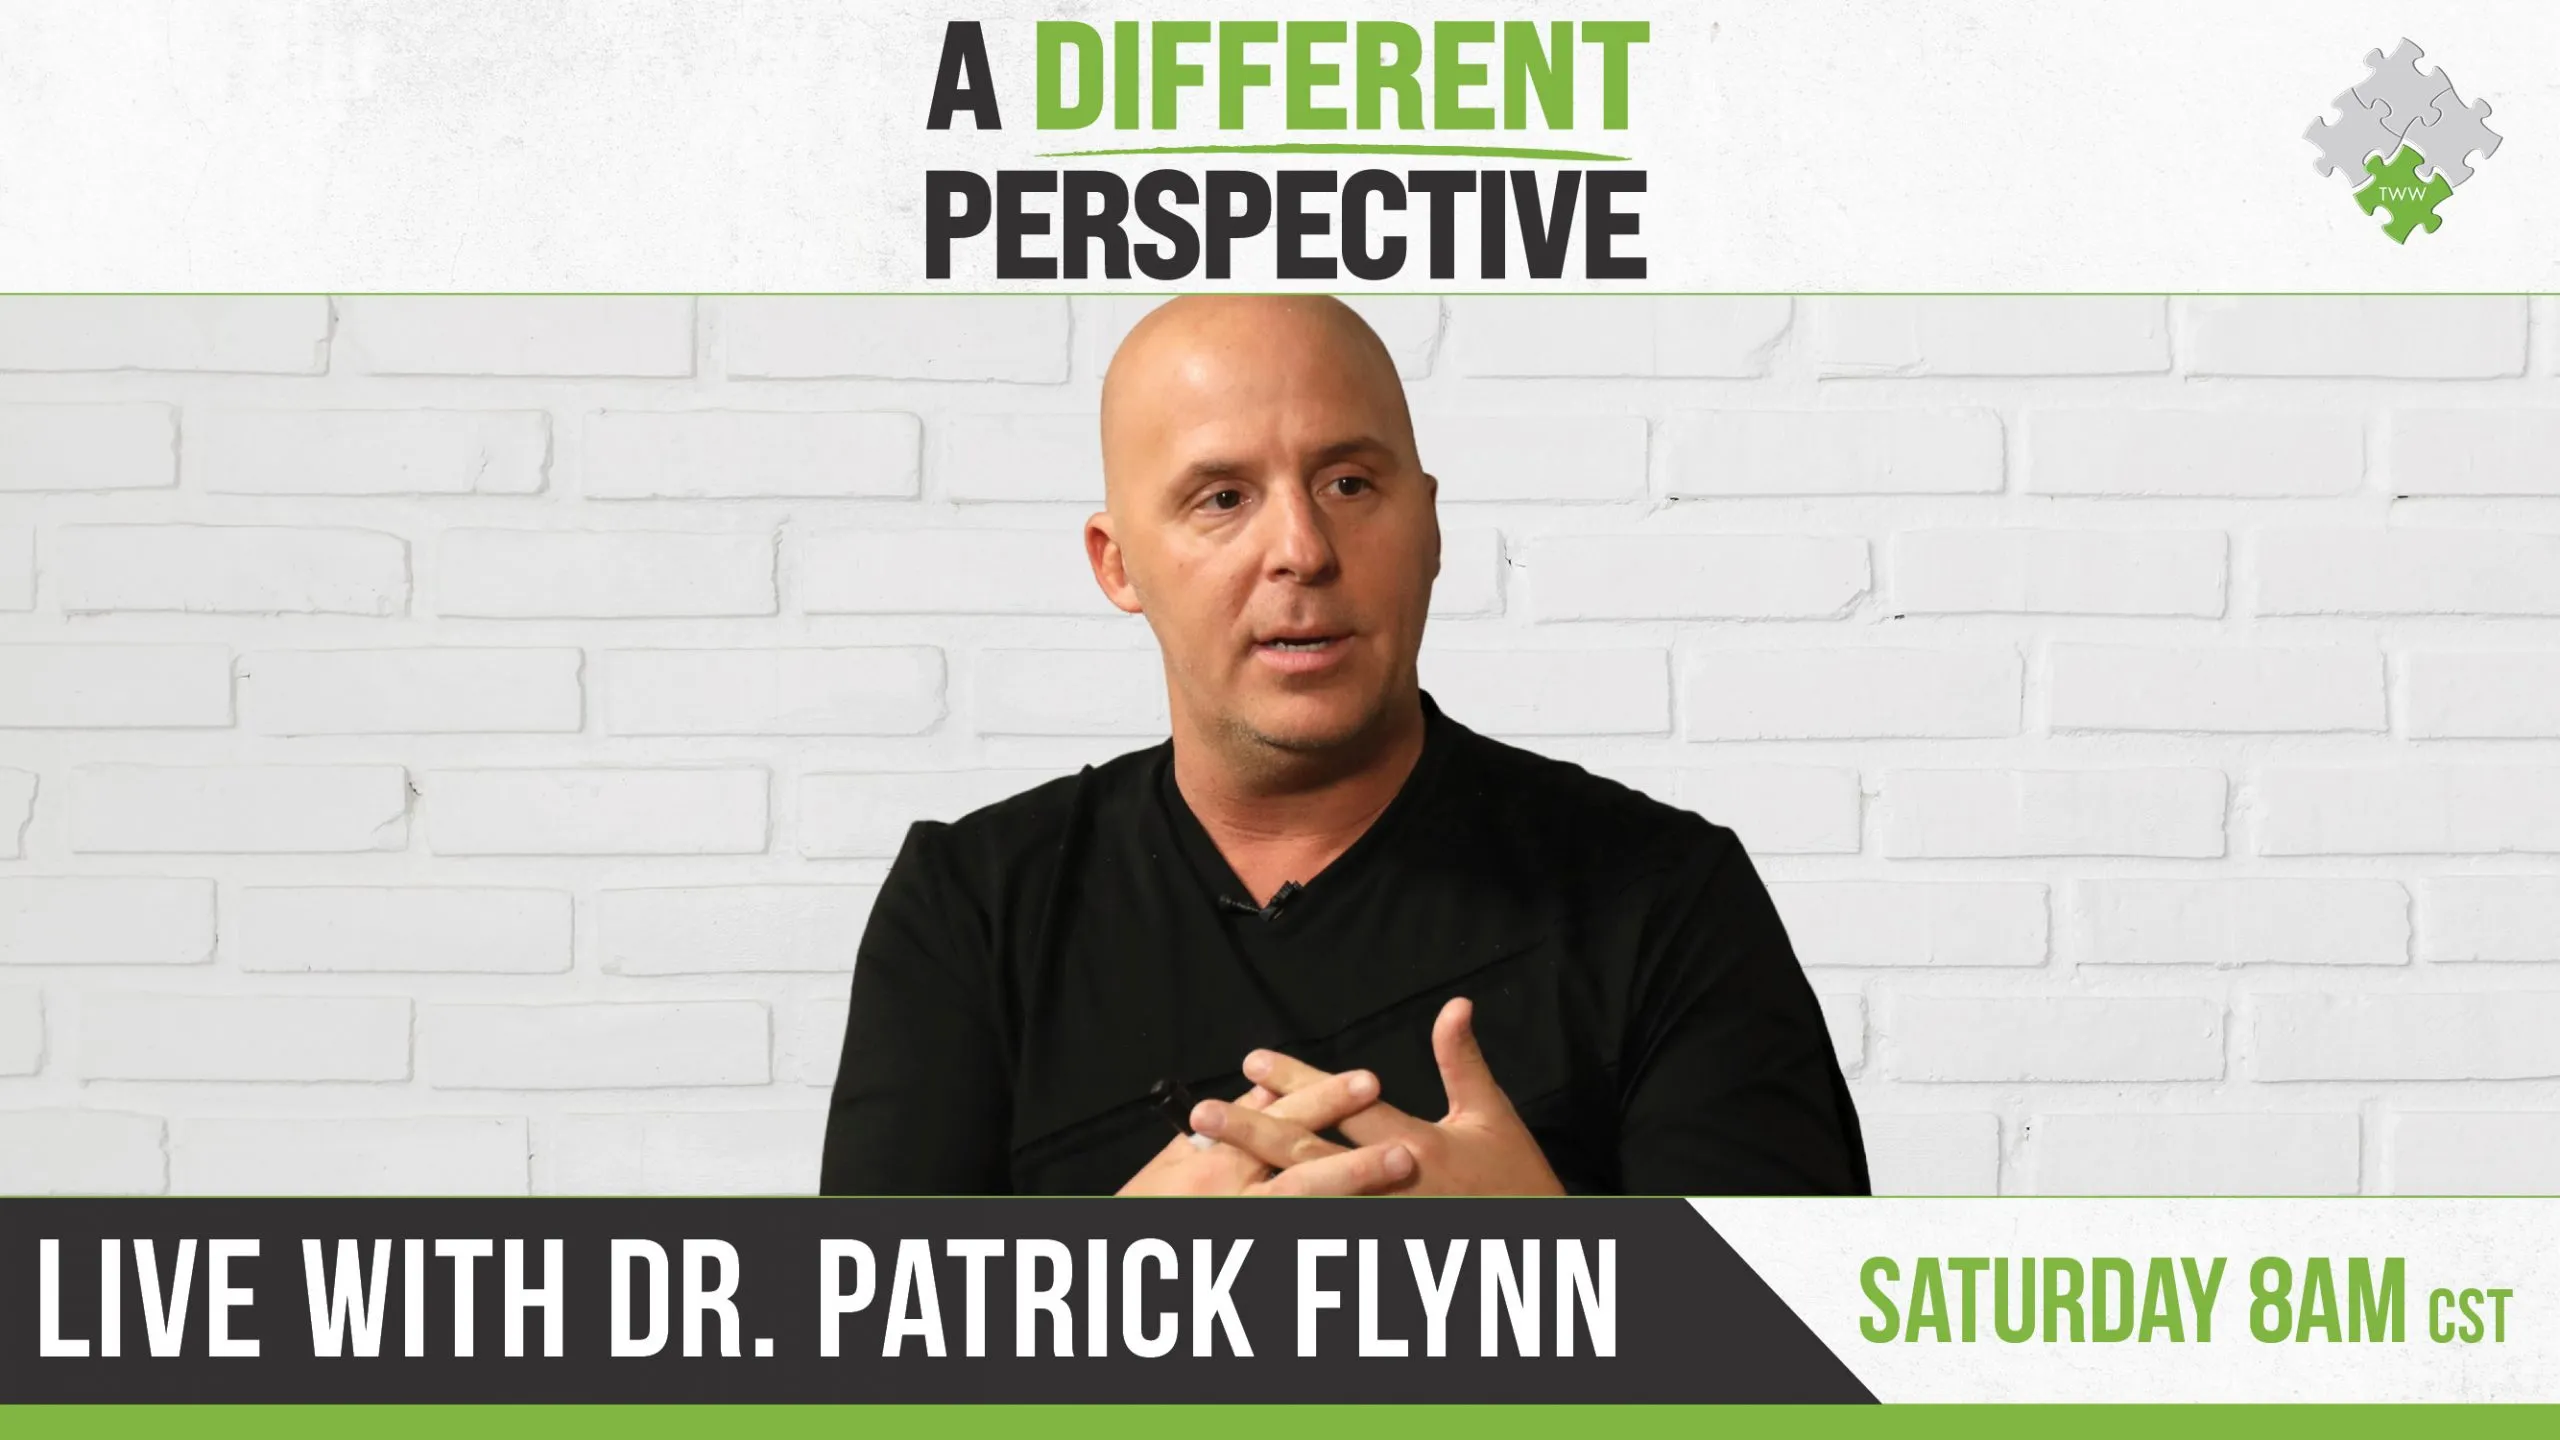 9.11.21 – “A Different Perspective with Dr. Patrick Flynn” Recap